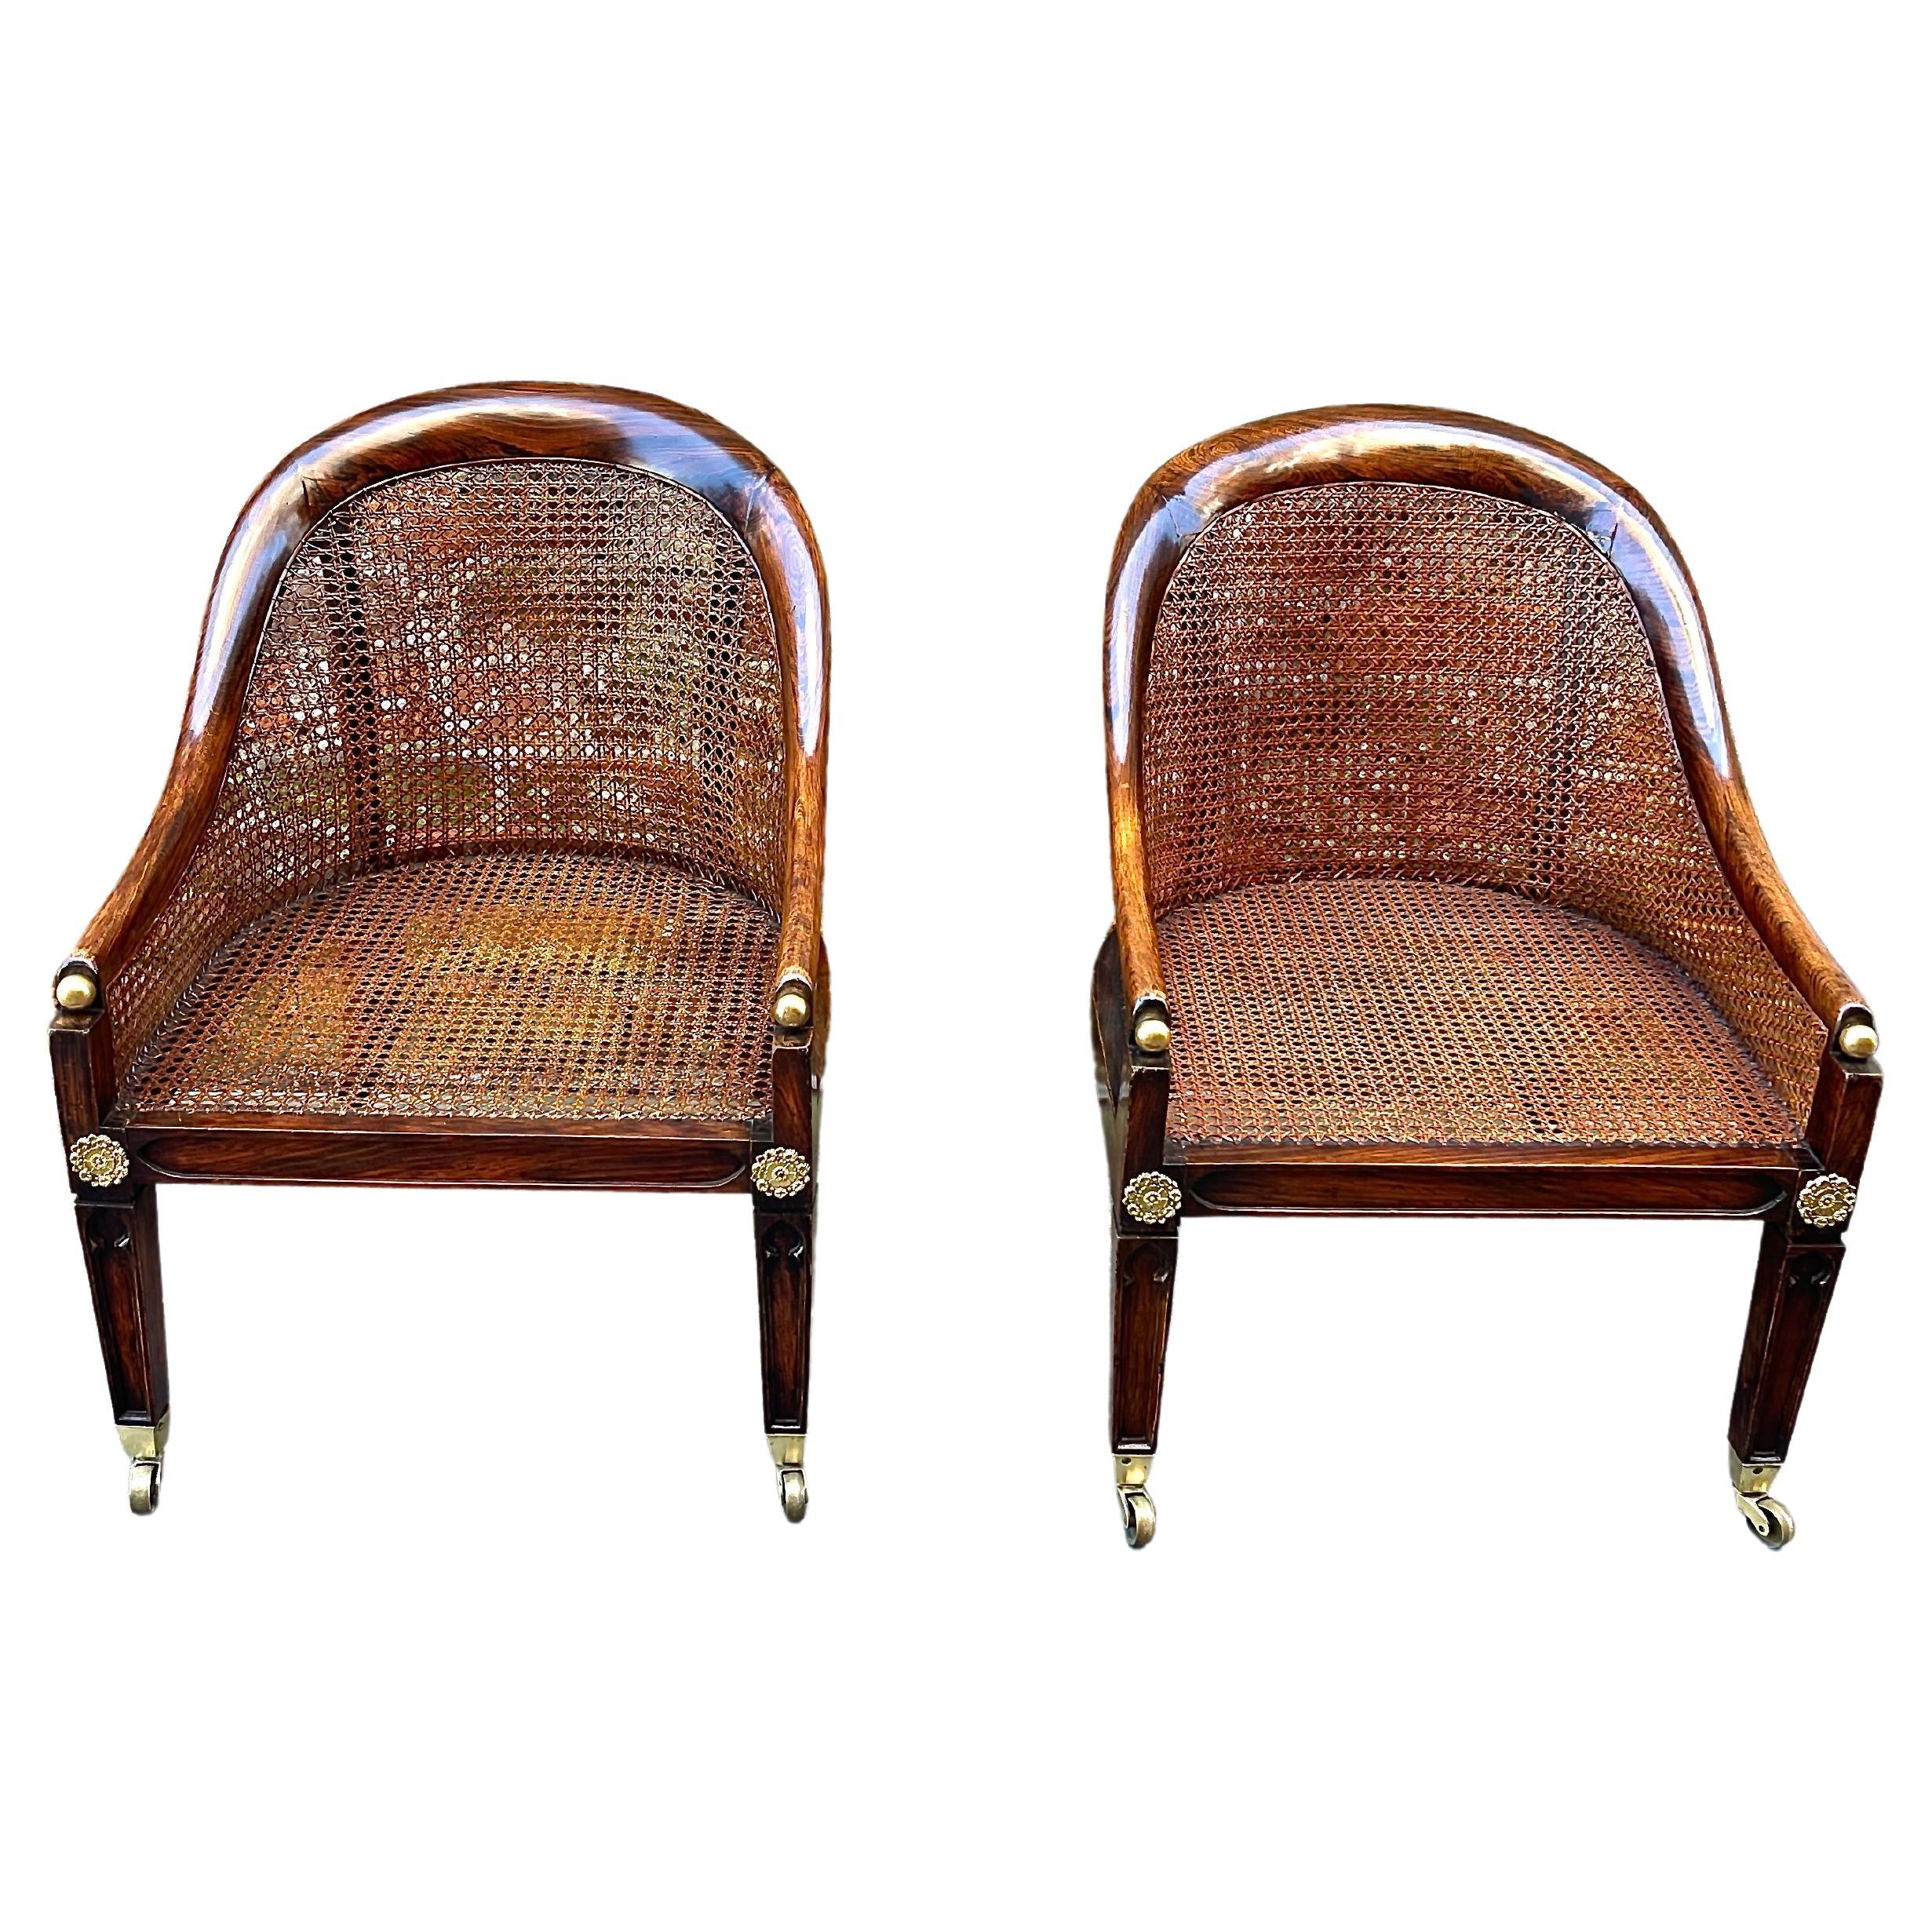 Pair of cane mahogany with faux grain rosewood early 19th century 